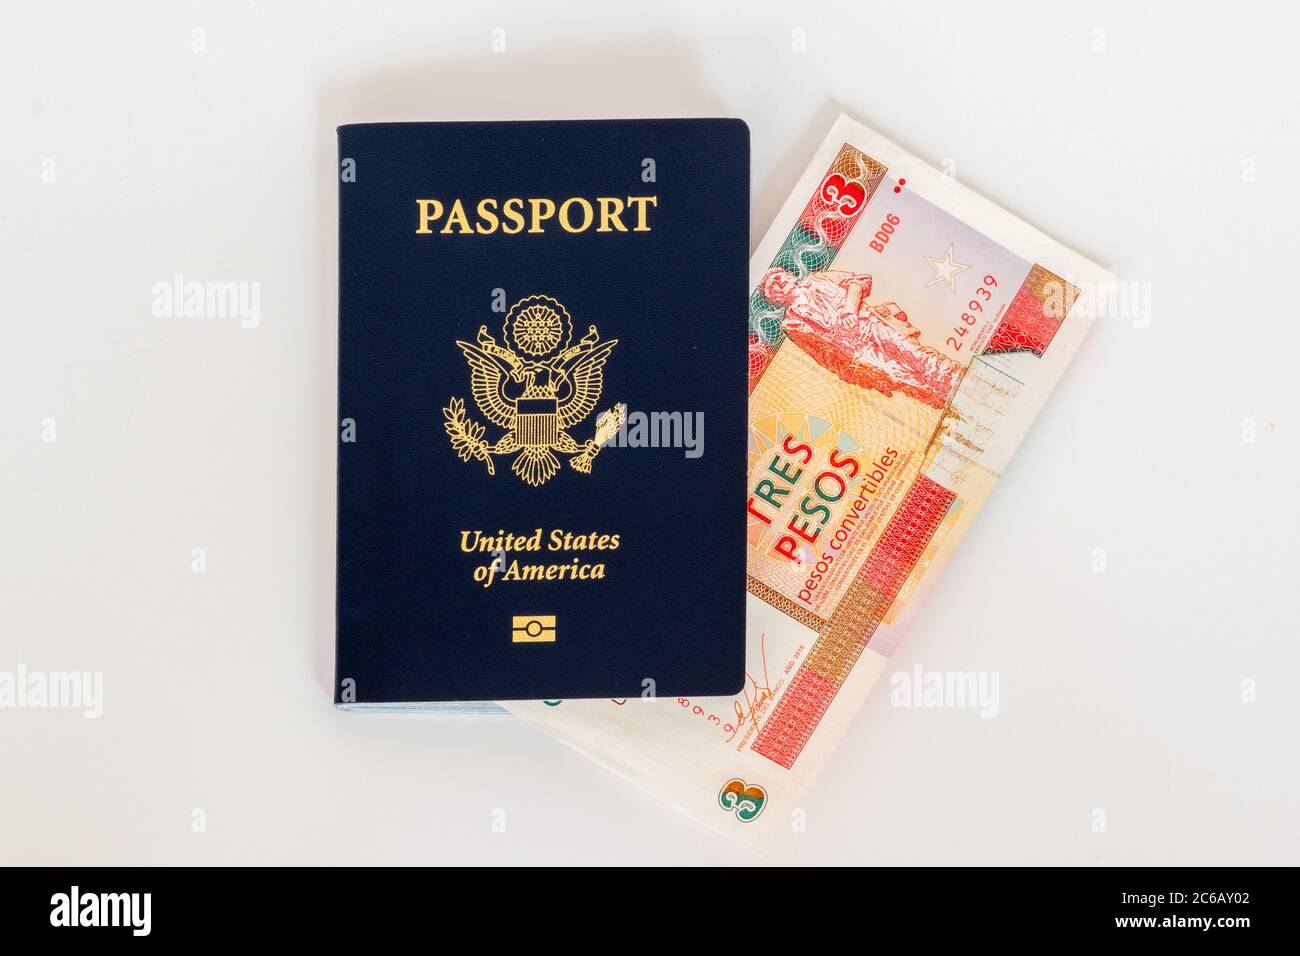 American passport and convertible cuban peso currency. Concept photo for American trade, commerce, business, and tourism with Cuba. Stock Photo